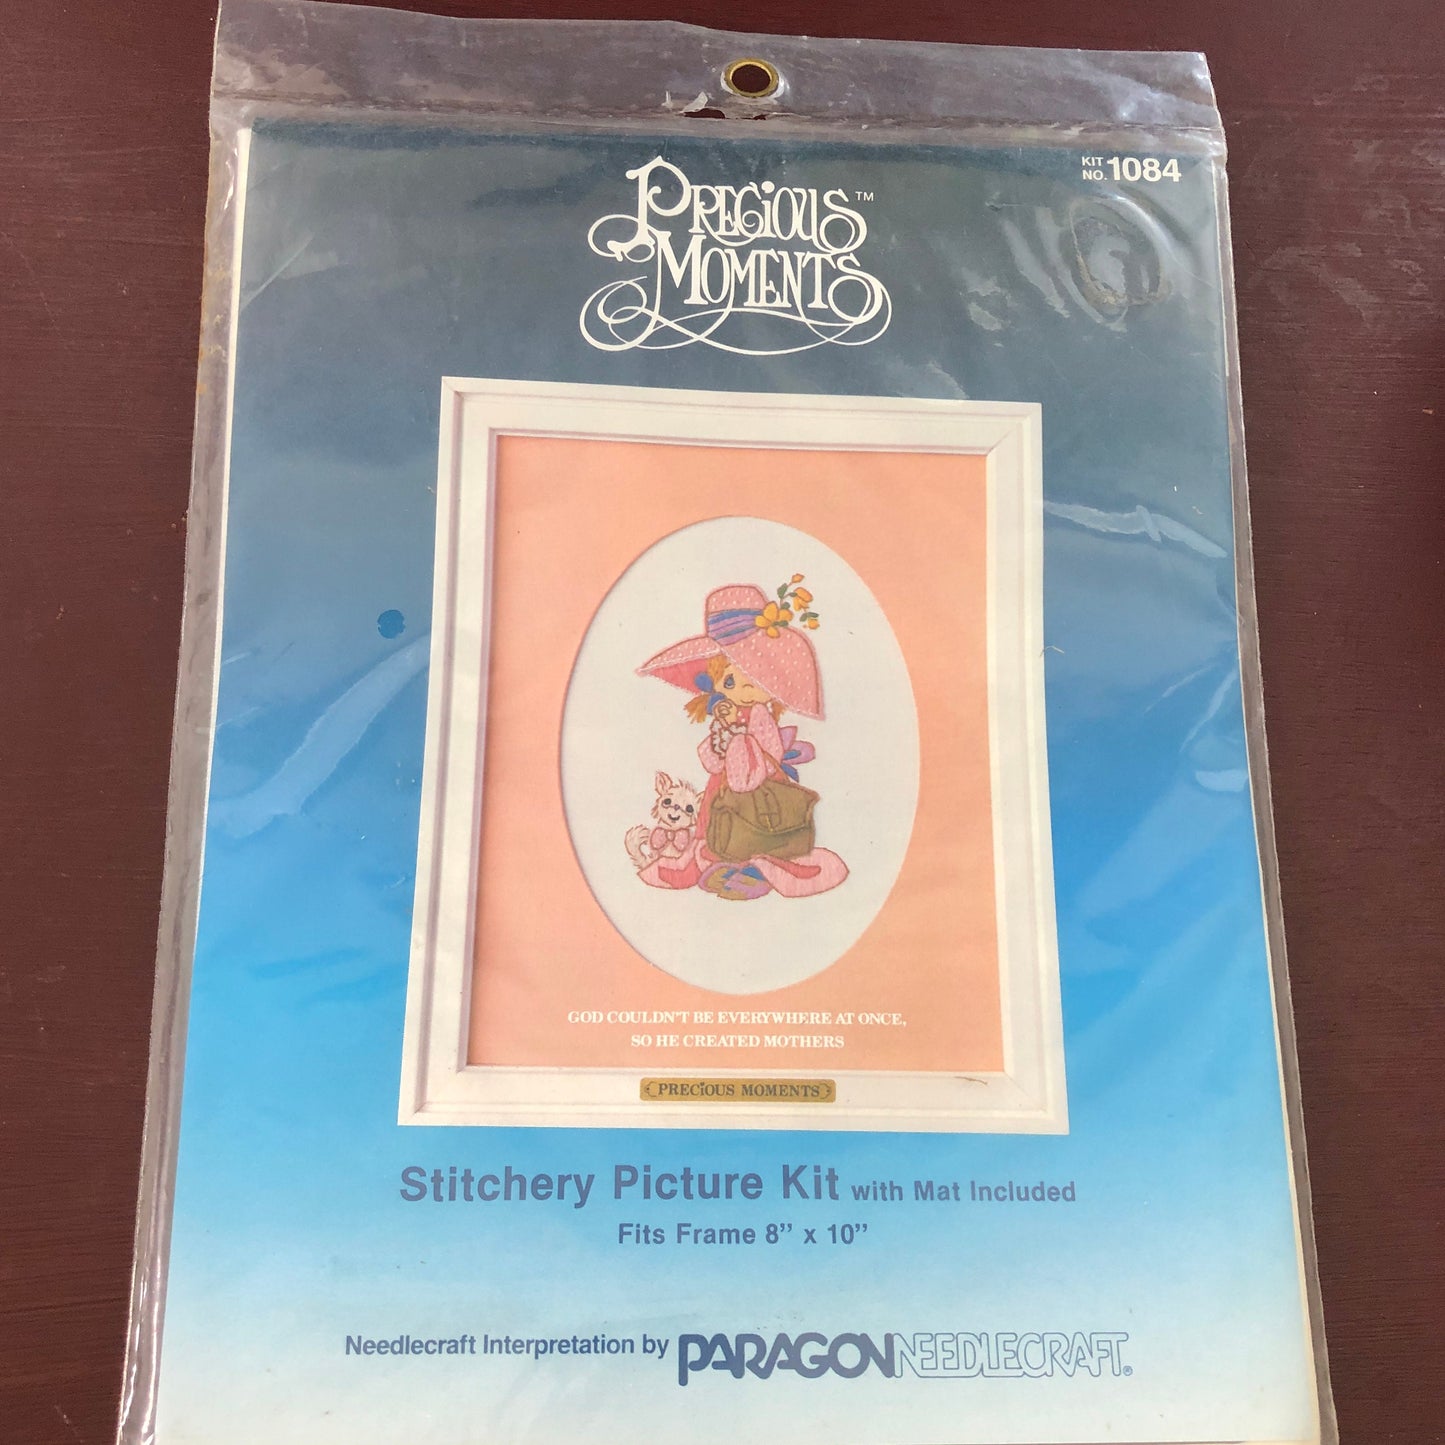 God Couldn't Be Everywhere at Once So He Created Mothers, Precious Moments, Paragon Needlecraft, Vintage 1984 Cross Stitch Kit, Mat Included